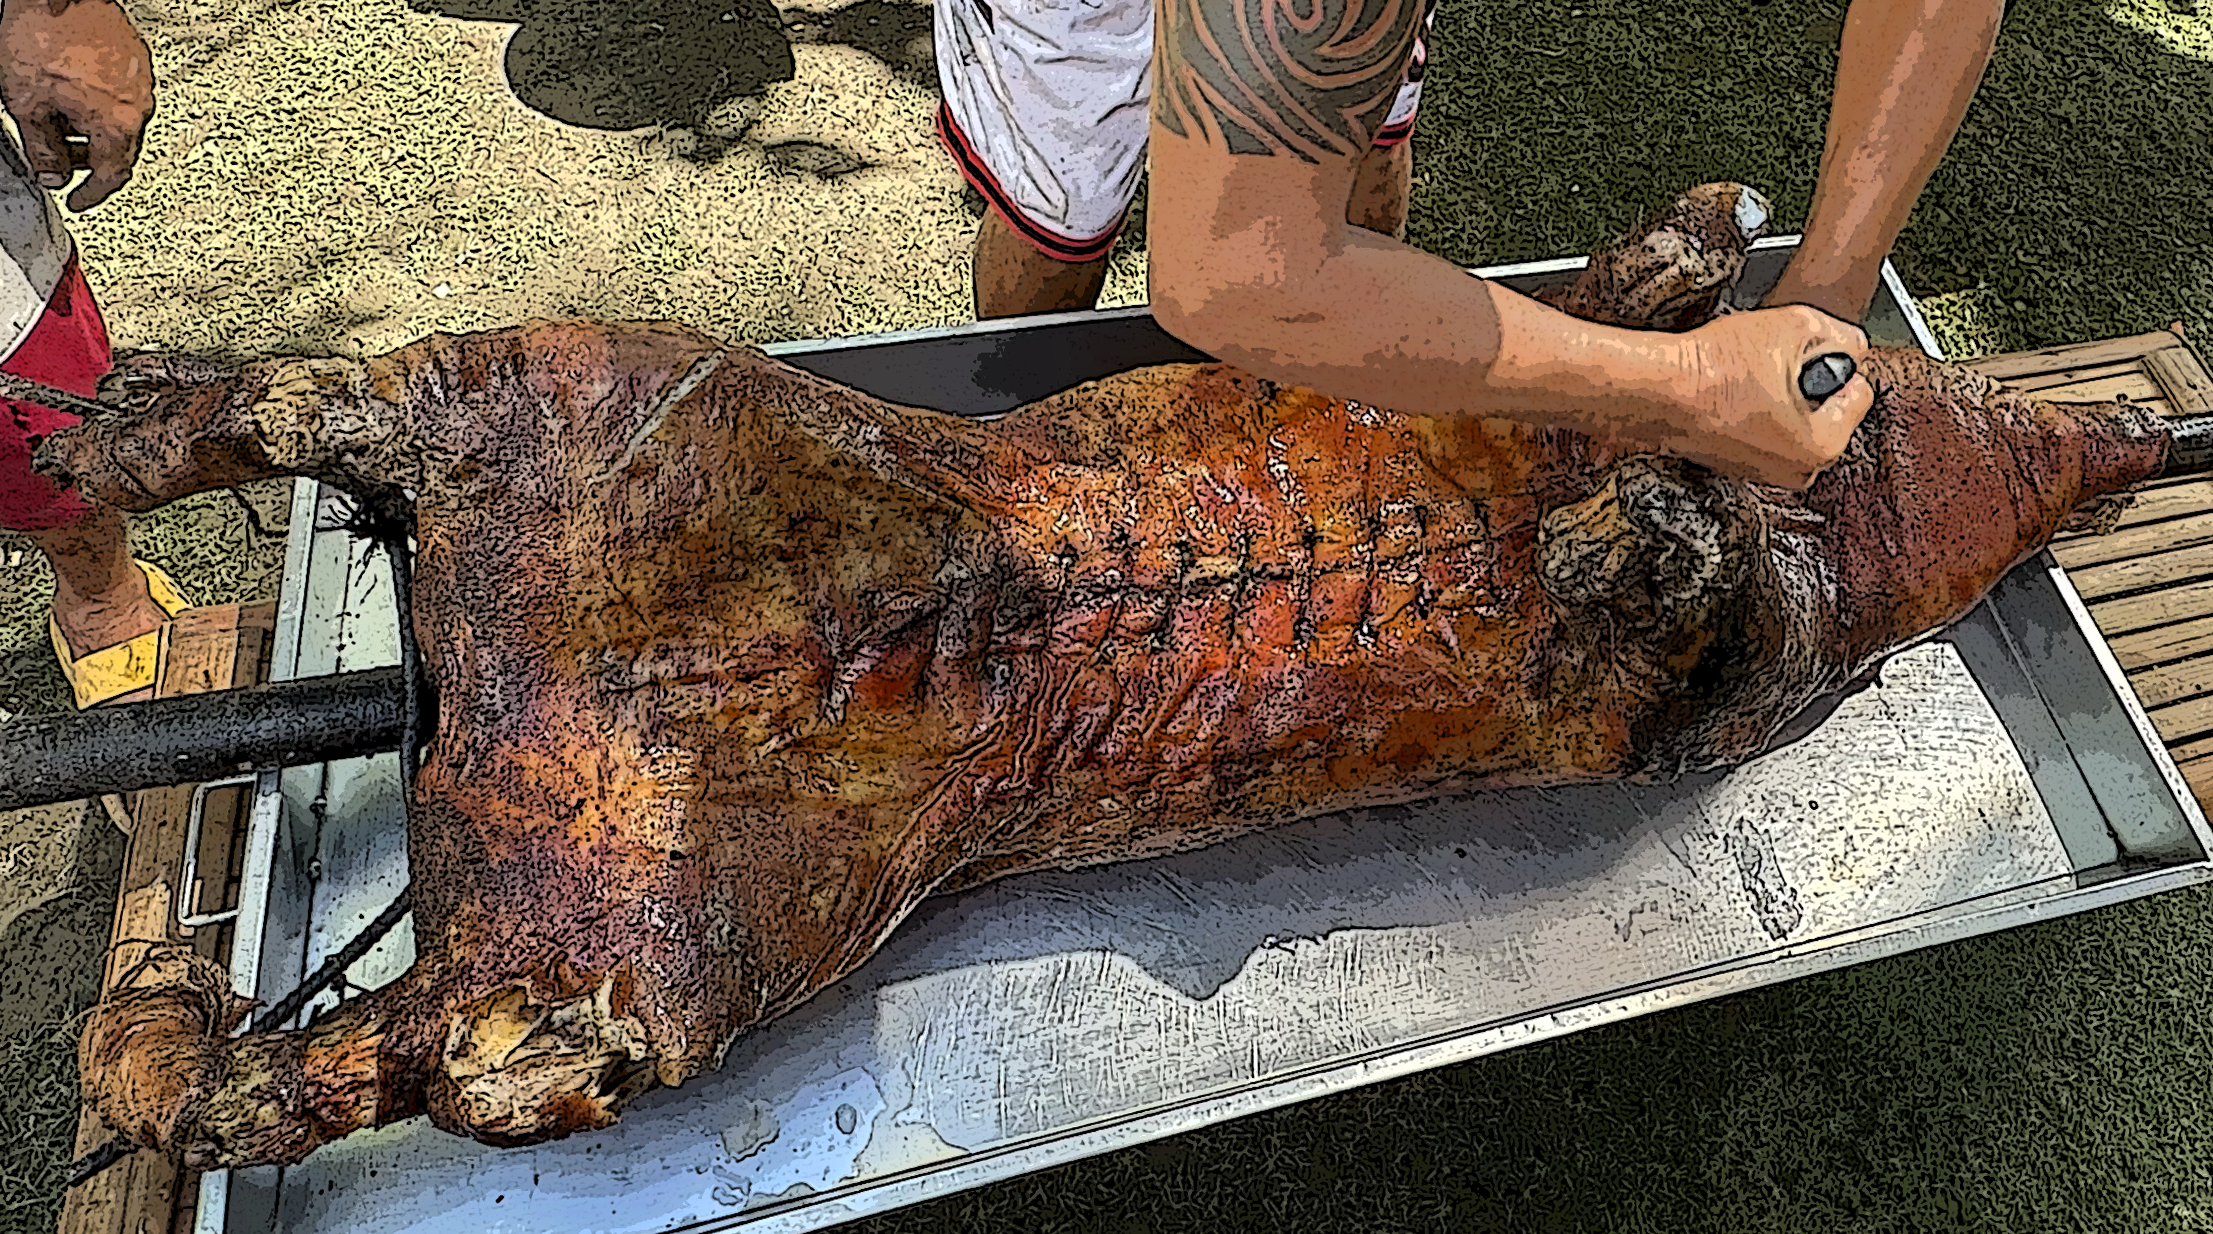 Tasting a Huge Lechon in a Mountain Barangay